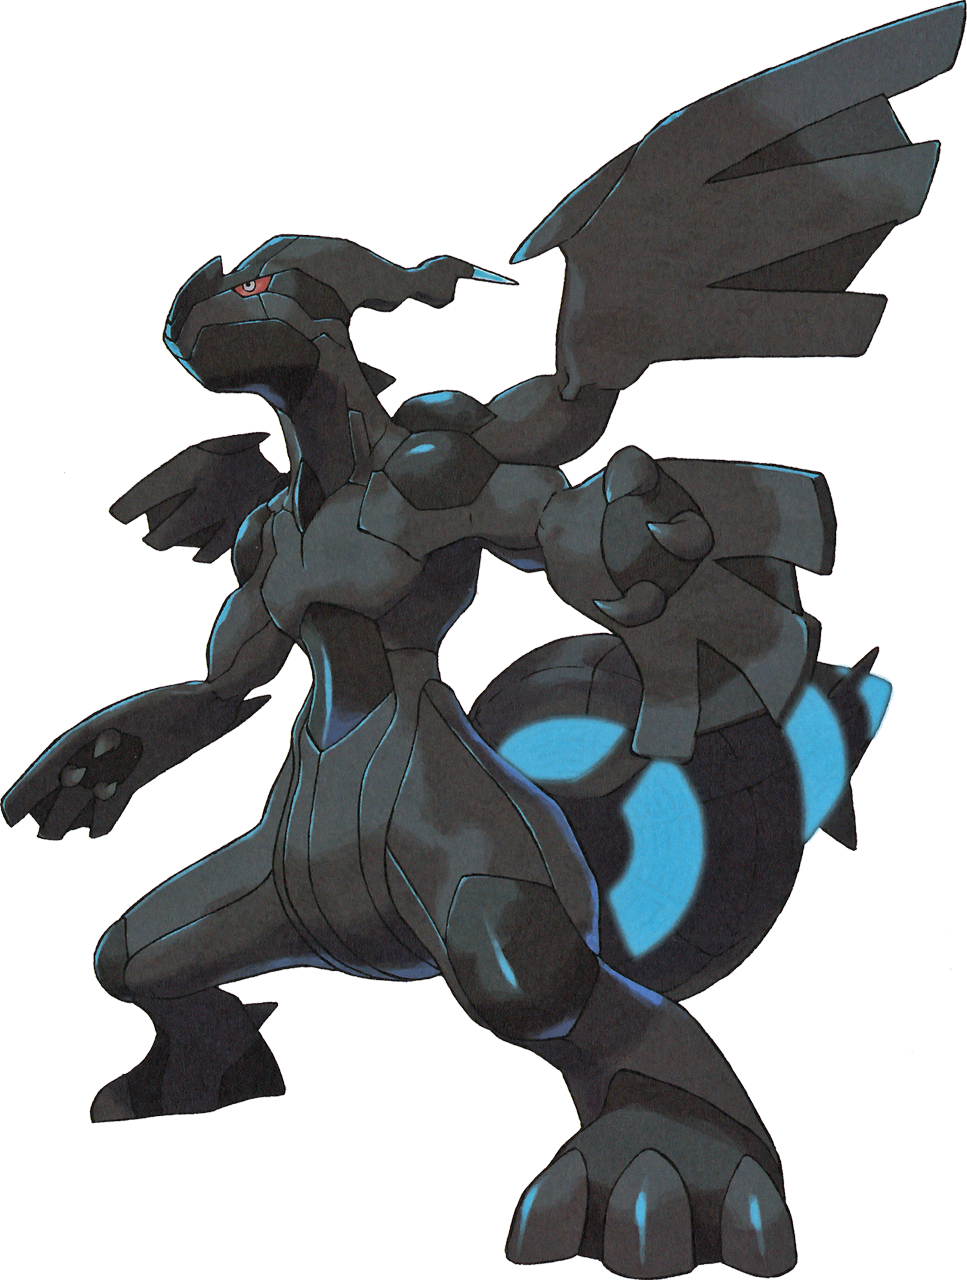 Cynthia’s Dragon – A Preliminary Analysis of Zekrom in VGC 2016